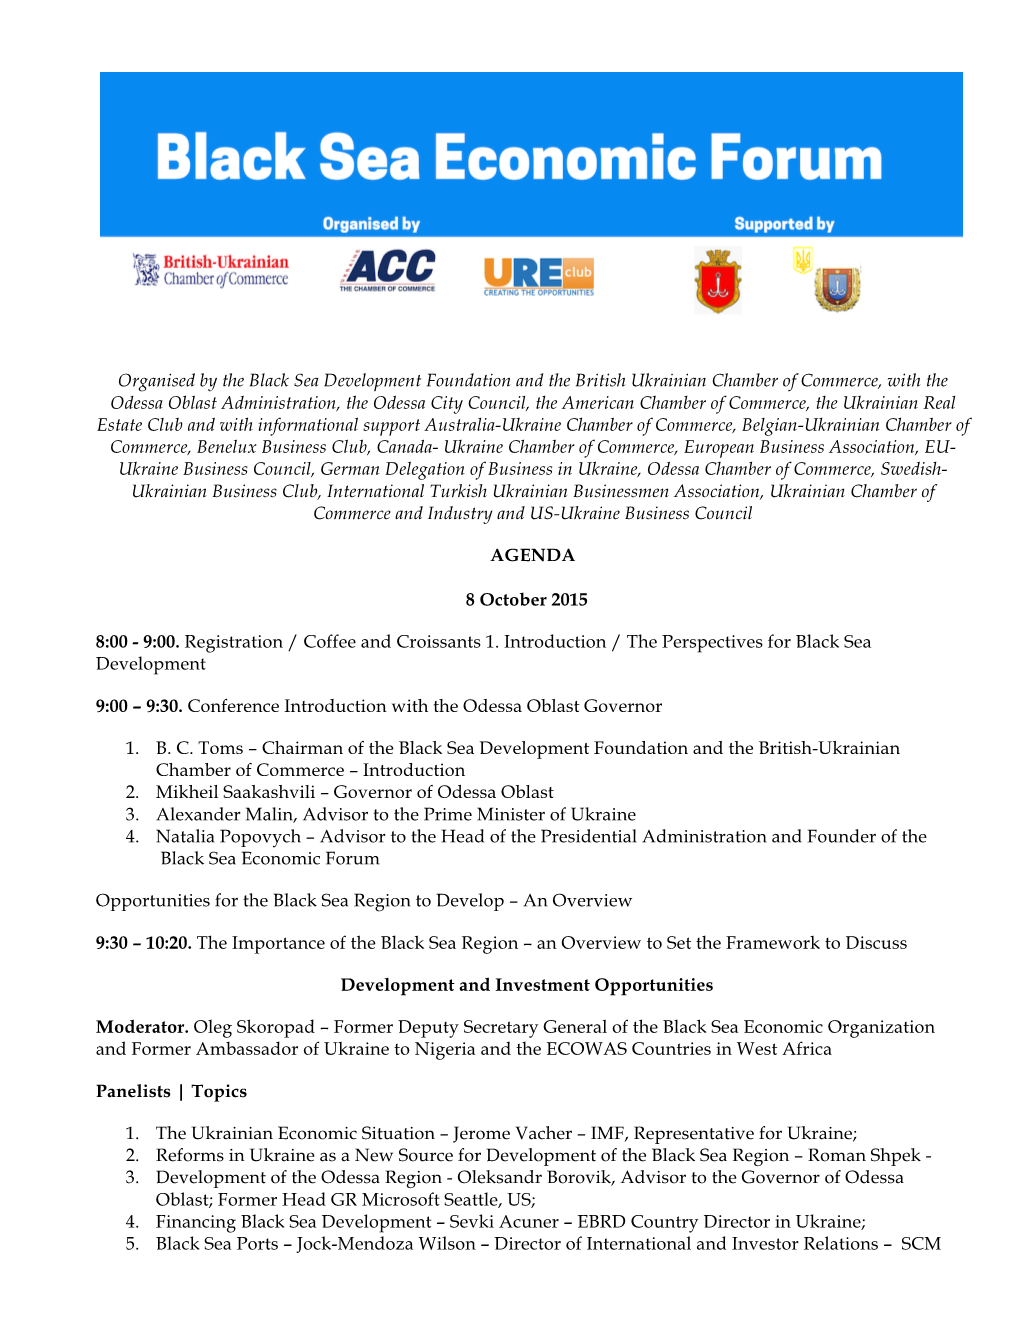 Organised by the Black Sea Development Foundation and The